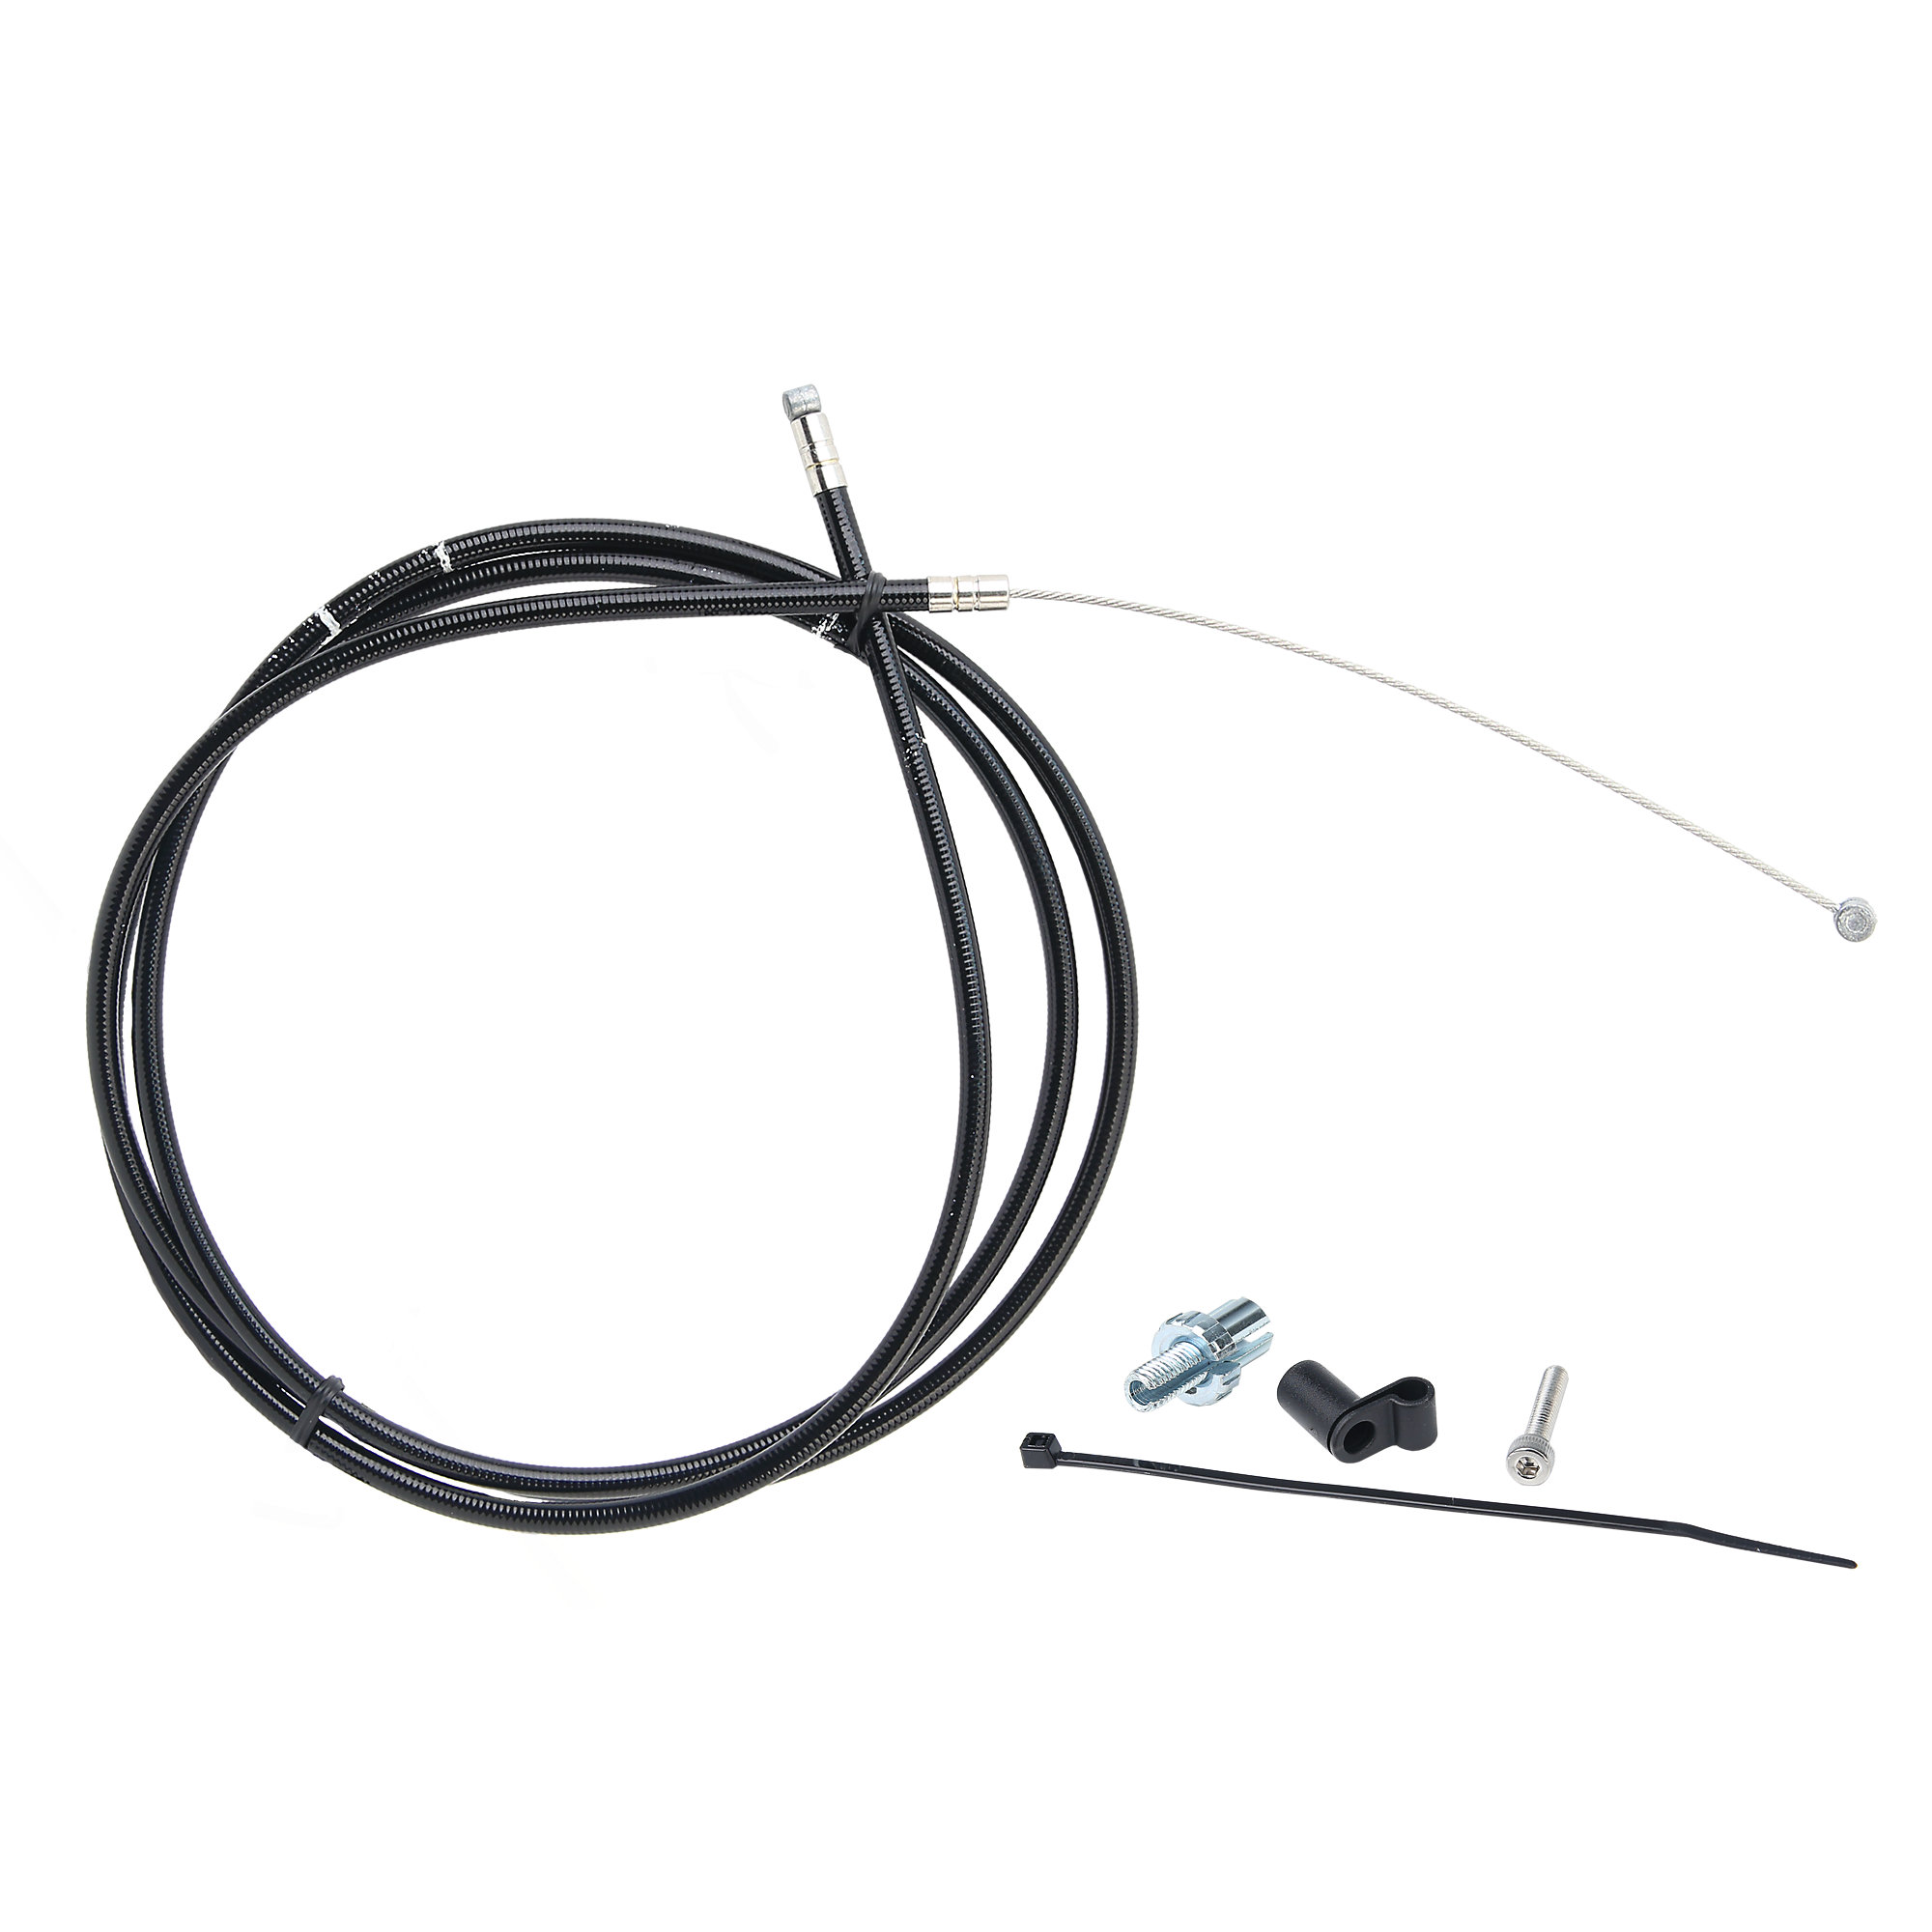 Bowden Cable Kit for Brake fits IC4/IC5/IC6, ICG